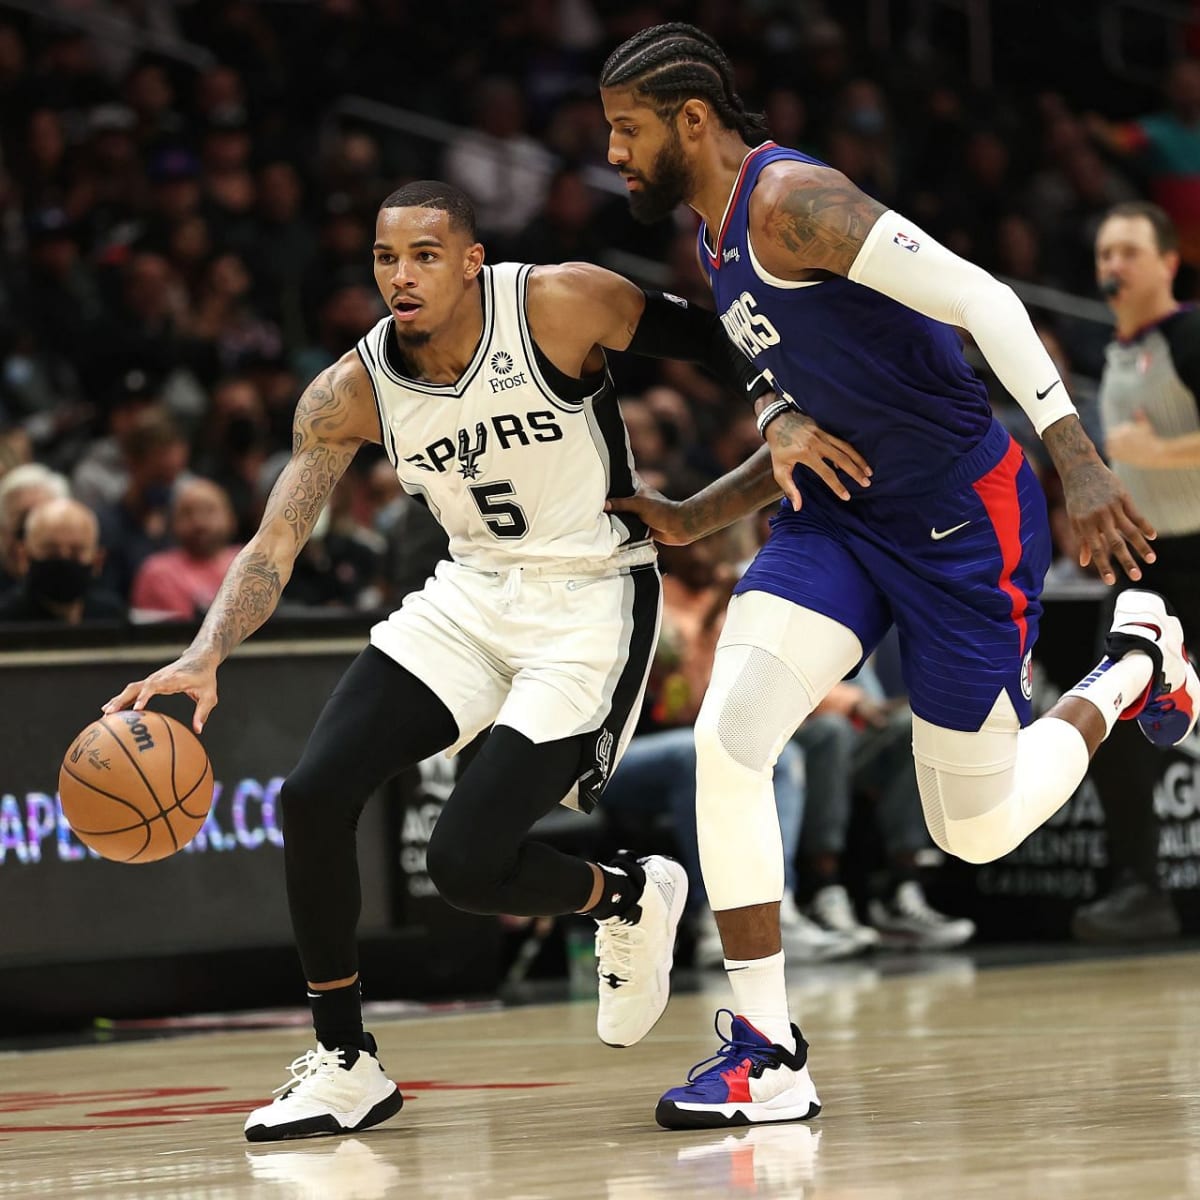 Dejounte Murray tells Paolo Banchero he 'lost all respect' for him